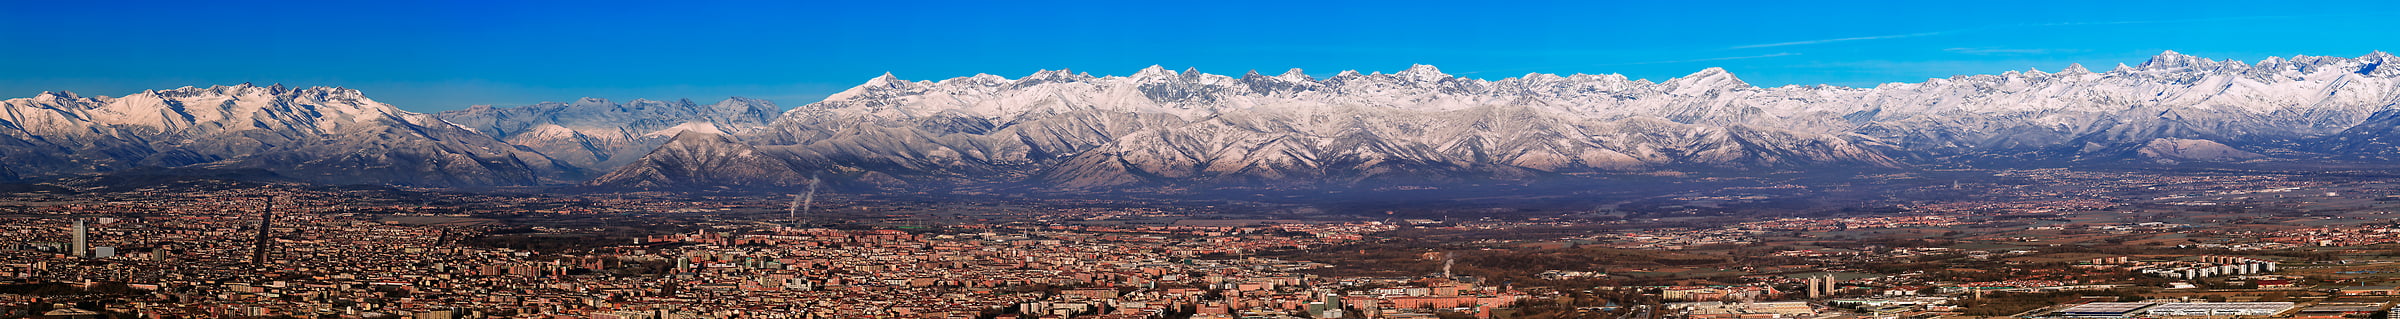 265 megapixels! A very high resolution, panorama photo of Turin, Italy; landscape photograph created by Duilio Fiorille from Basilica of Superga over Turin, Piedmont, Italy.